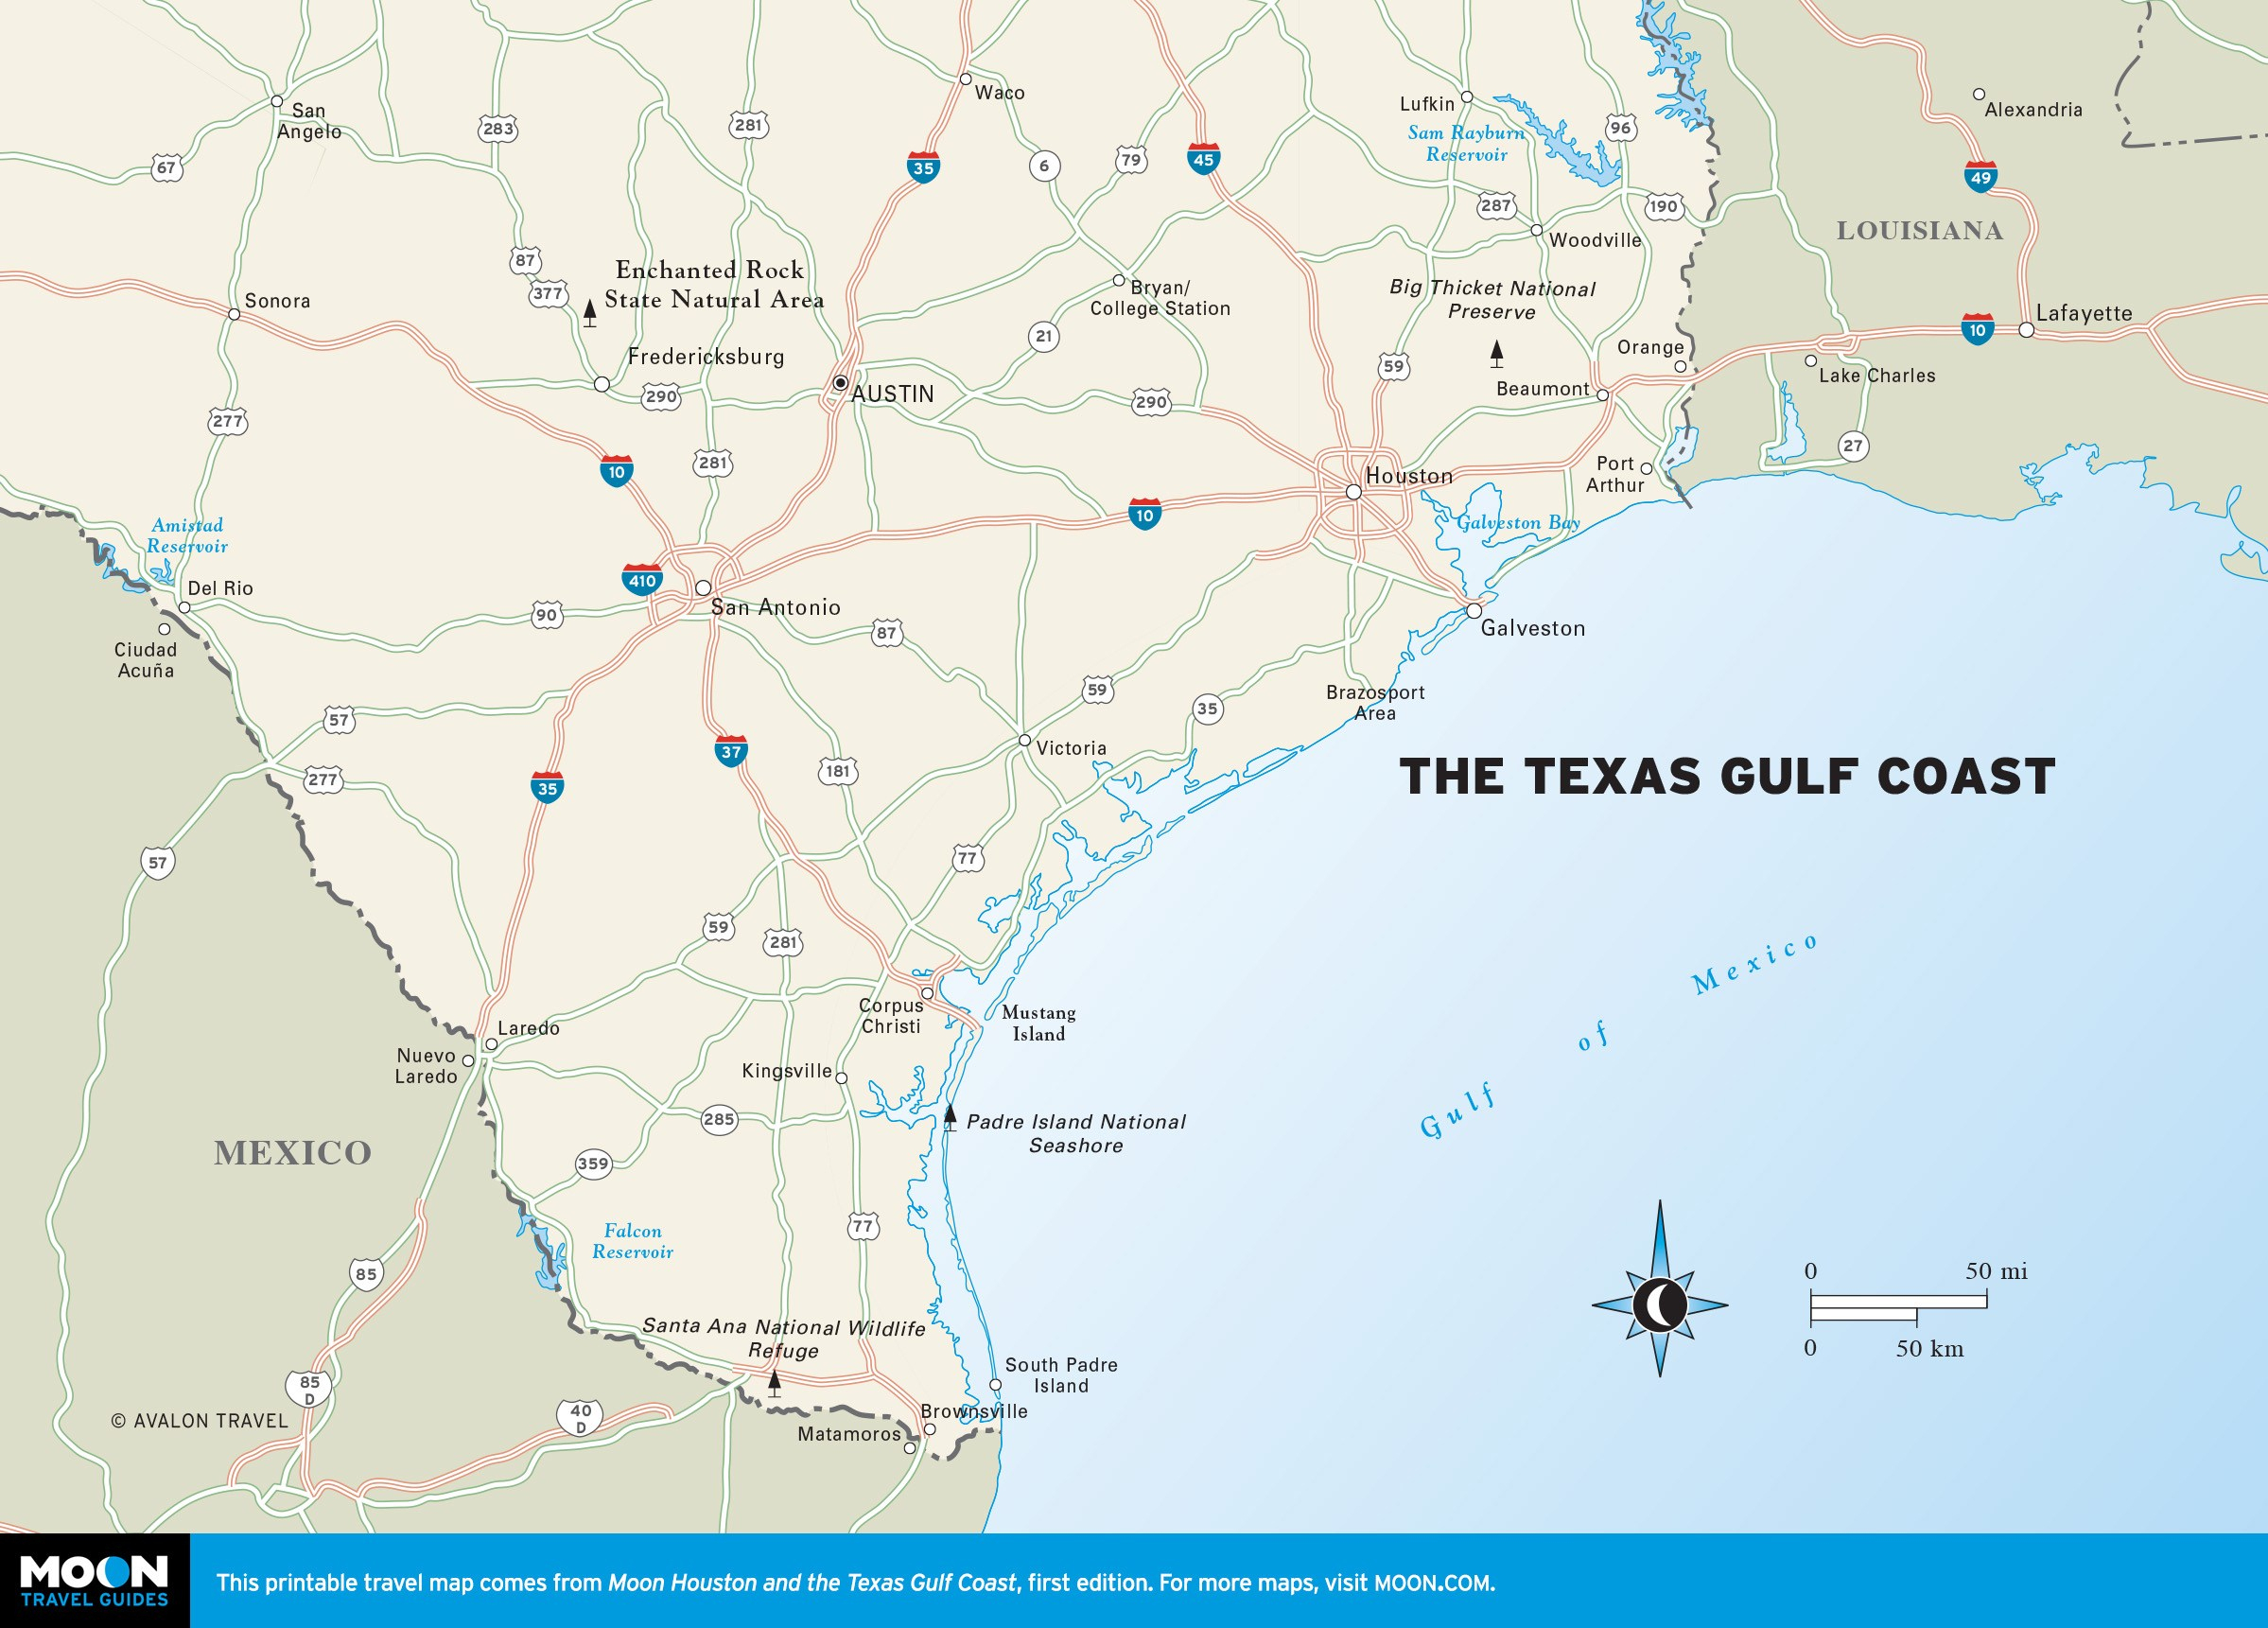 Maps Of Texas Gulf Coast And Travel Information | Download Free Maps - Texas Gulf Coast Beaches Map